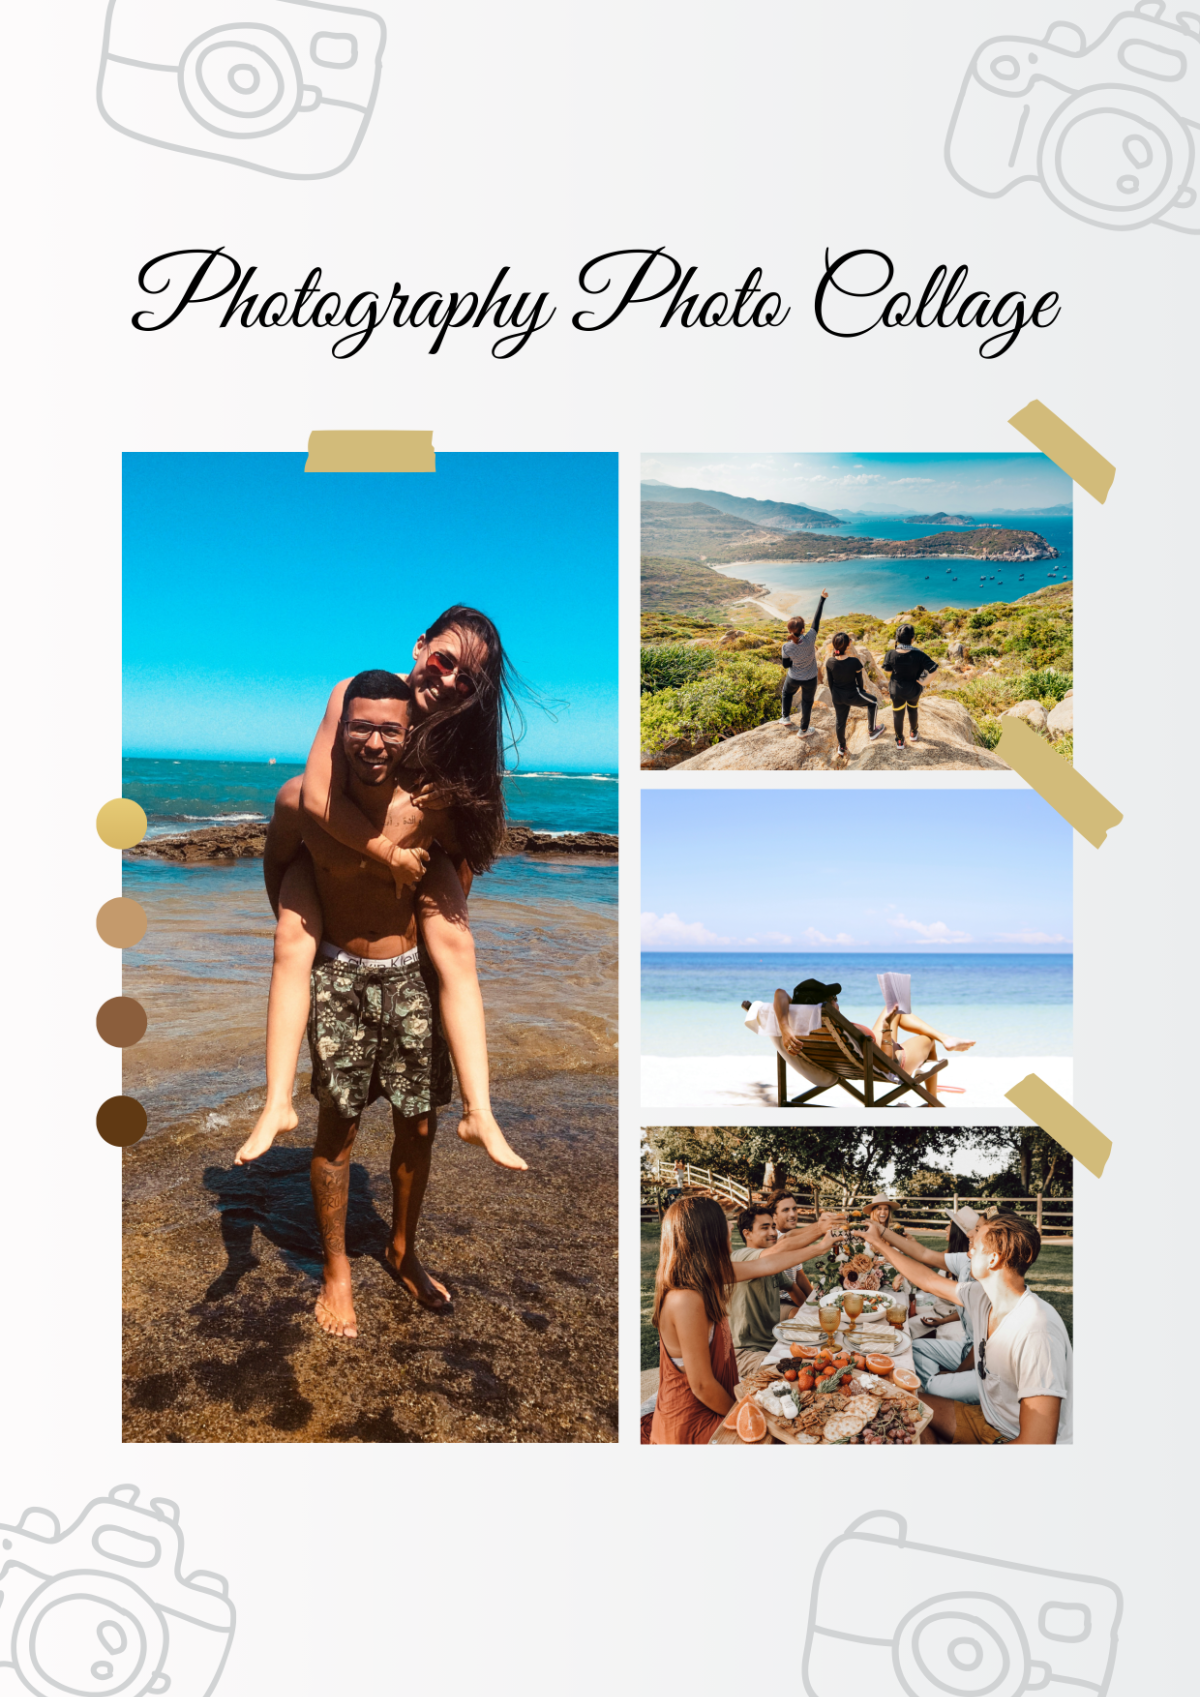 Free Photography Photo Collage Template